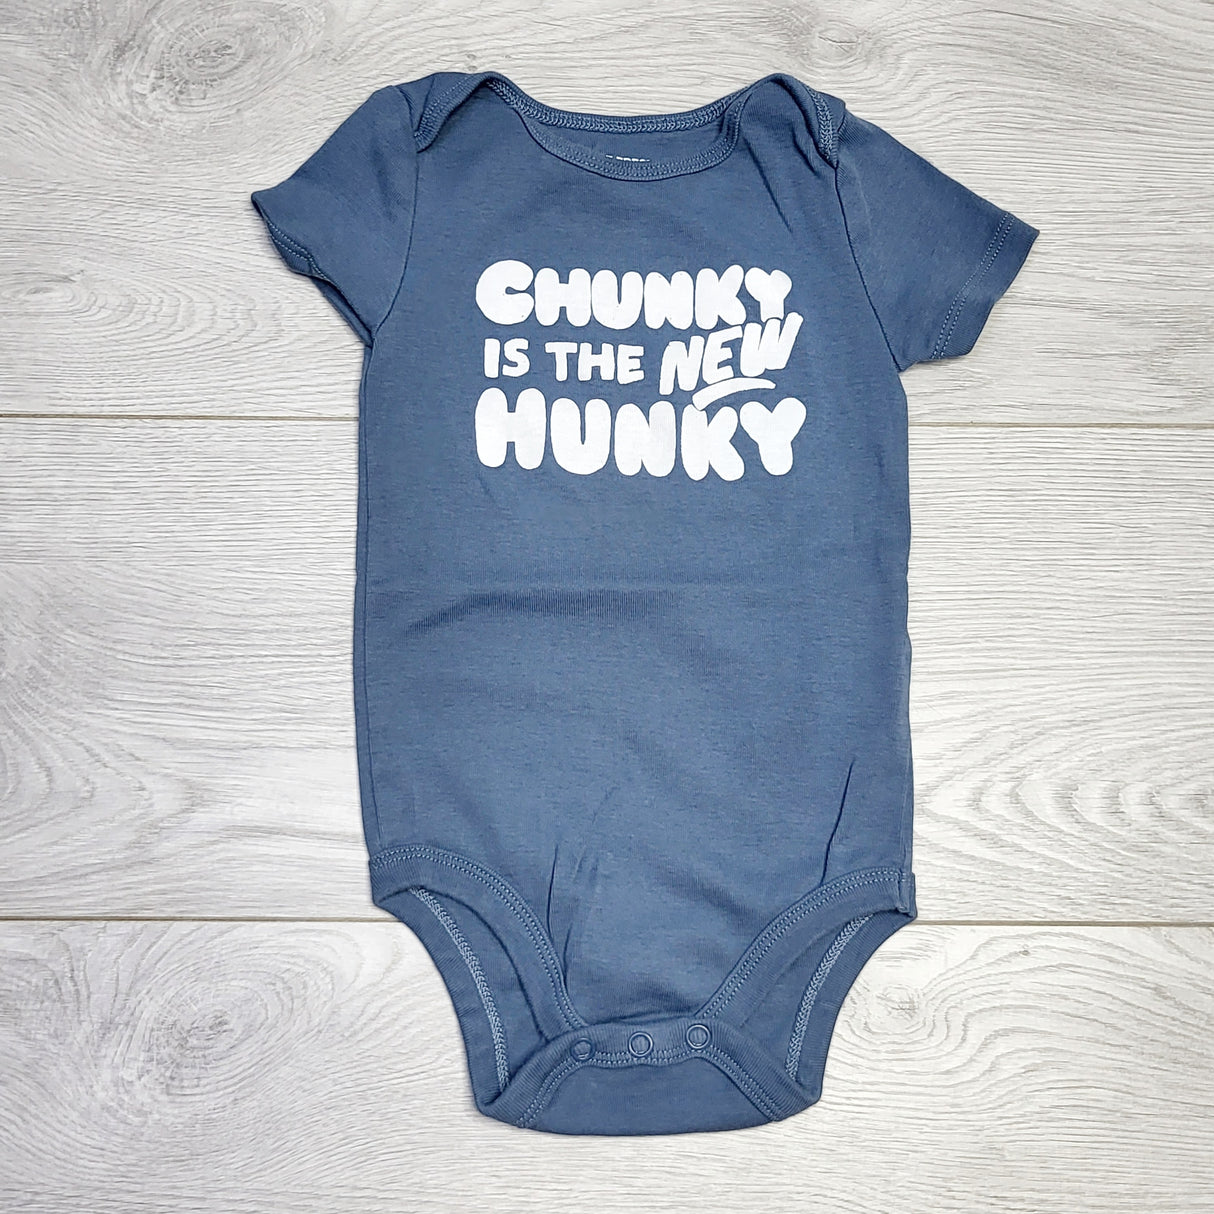 RZA2 - Joe grey-blue "Chunky is the New Hunky" onesie. Size 12-18 months